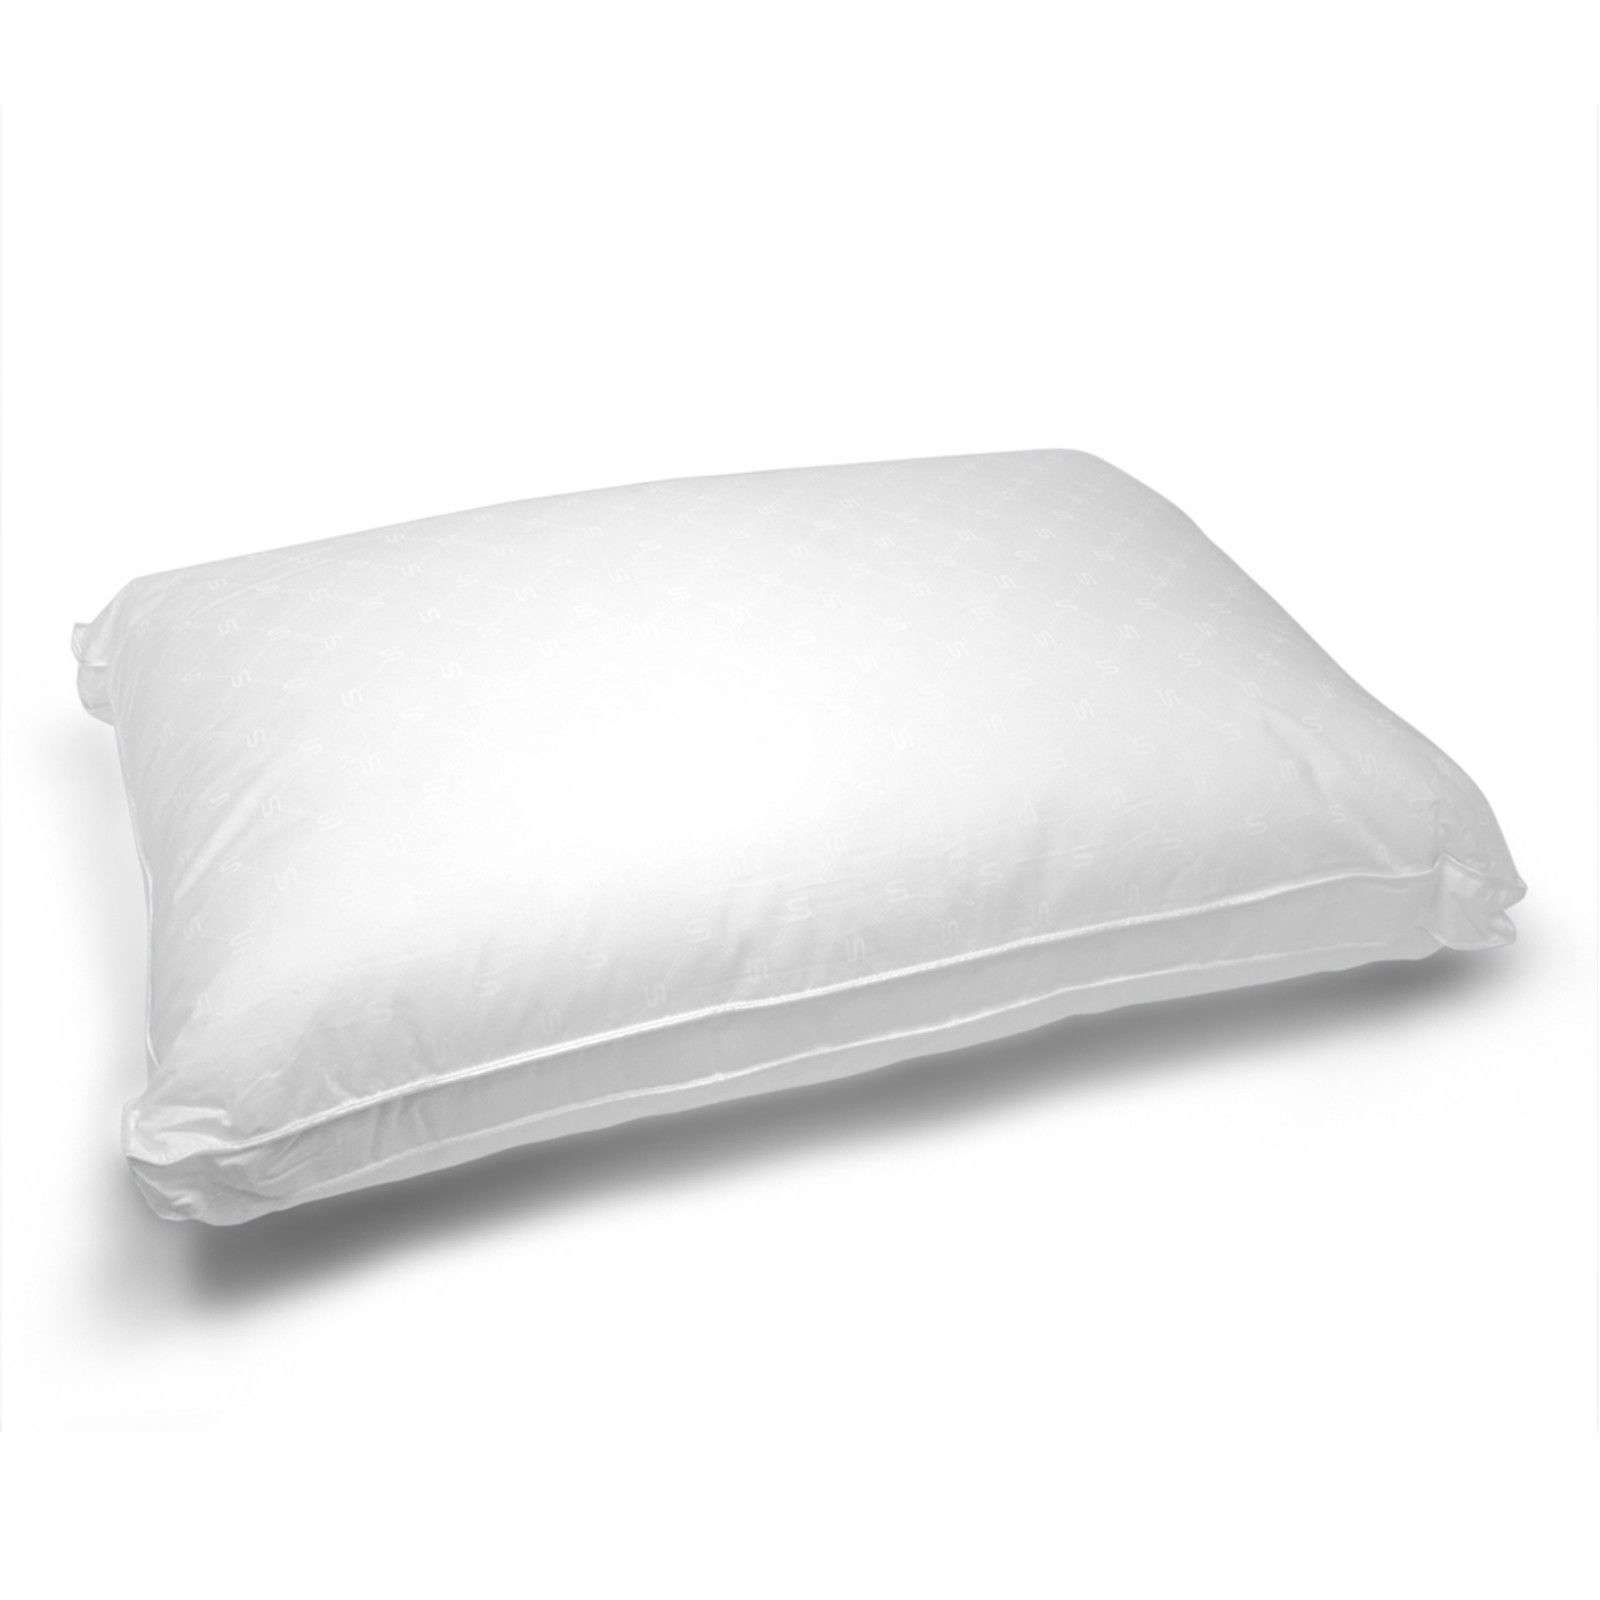 400-T/C-Cover-4-x-Pillow-1000G